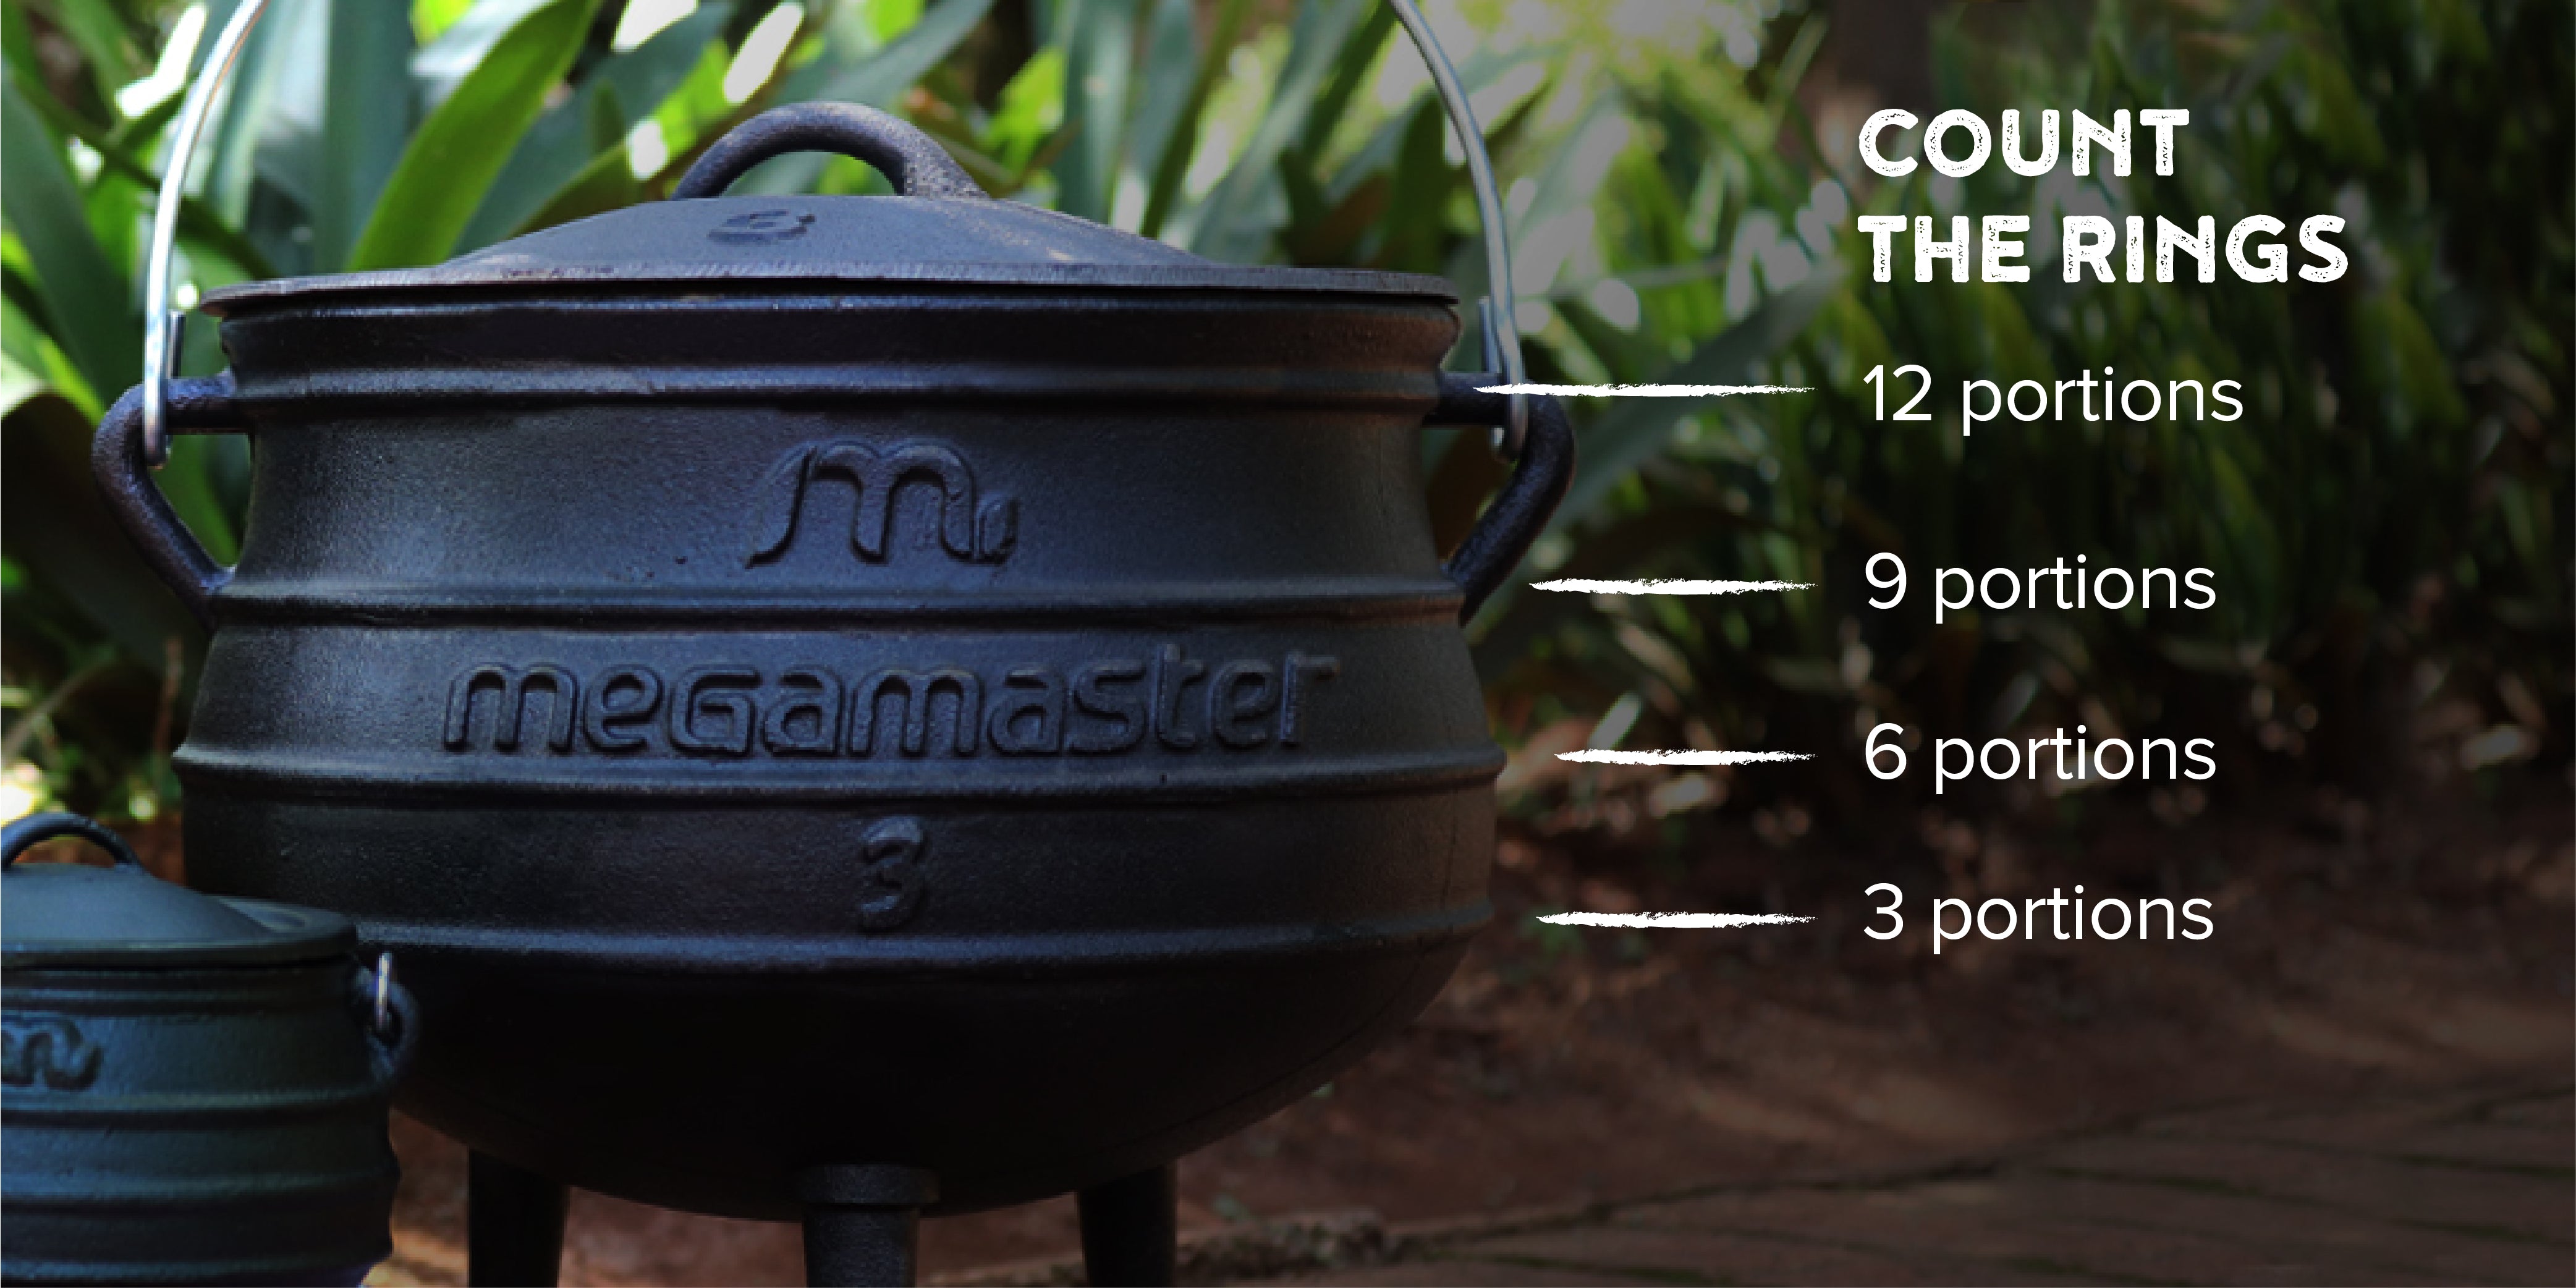 Prep, clean and care for your potjie